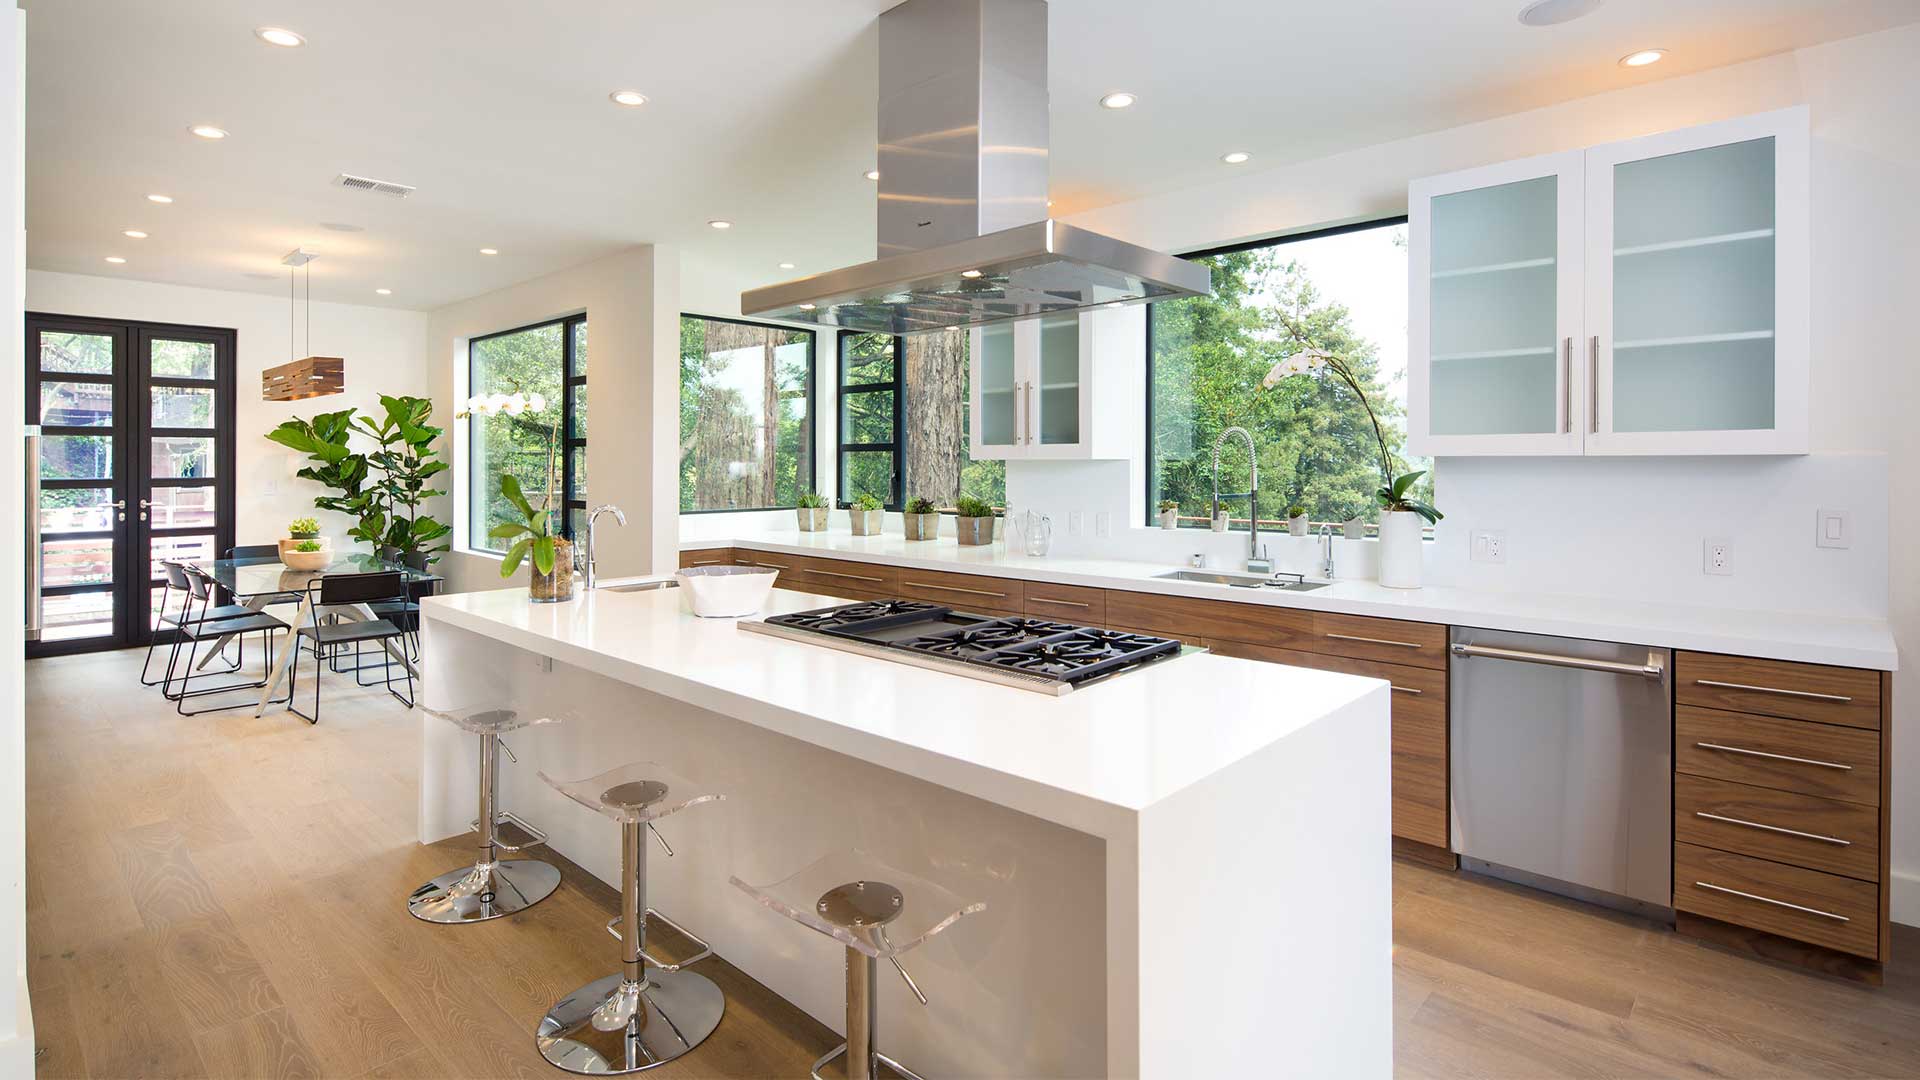 San Francisco Kitchen Remodeling, Bathroom Remodeling and Home Additions